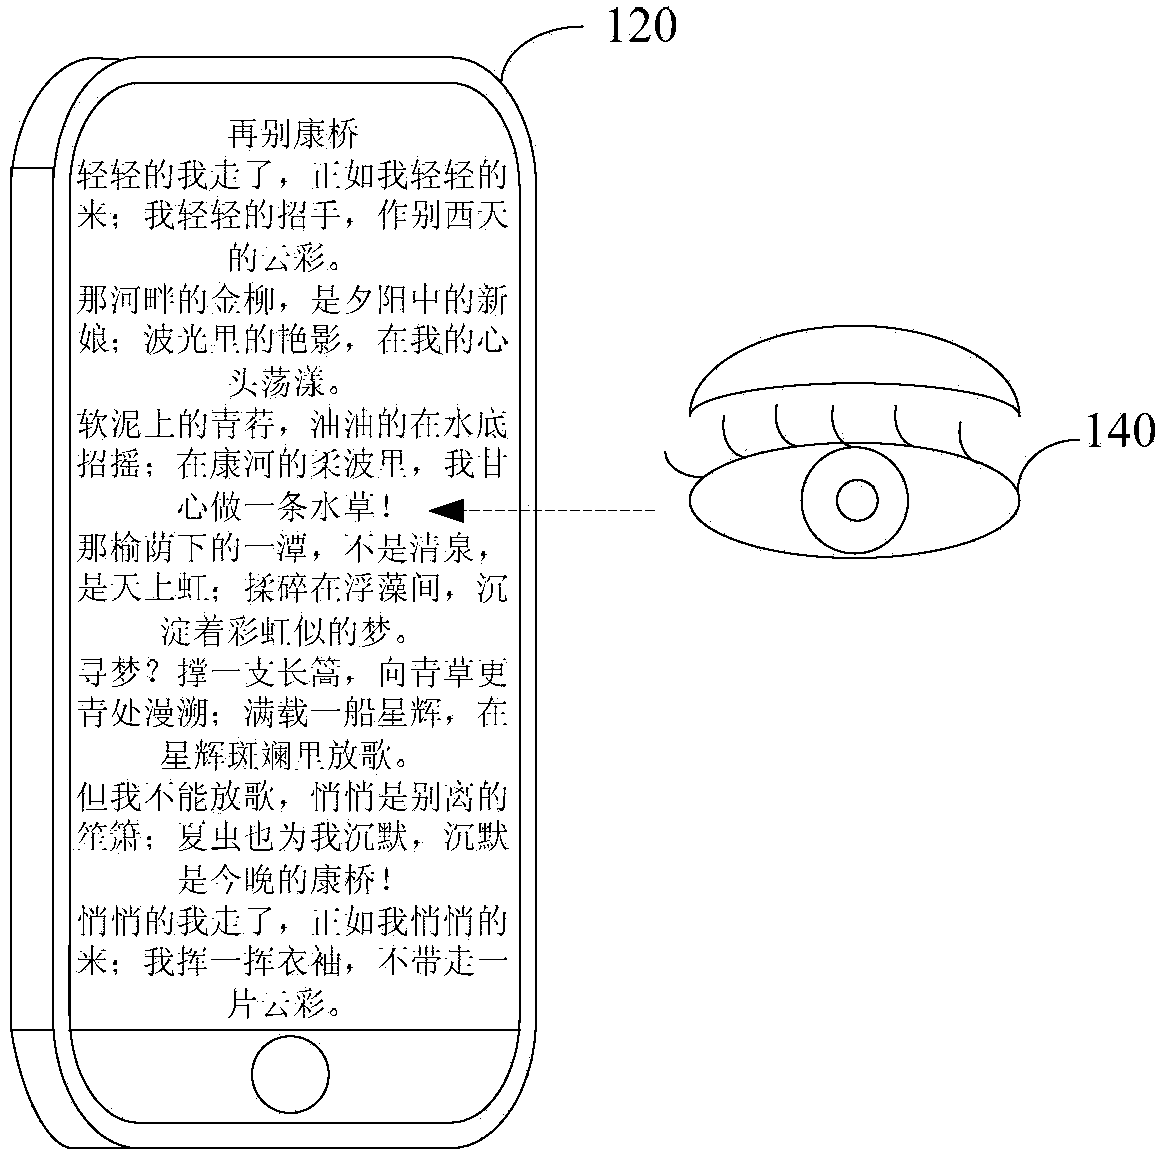 Eye movement tracking method and device